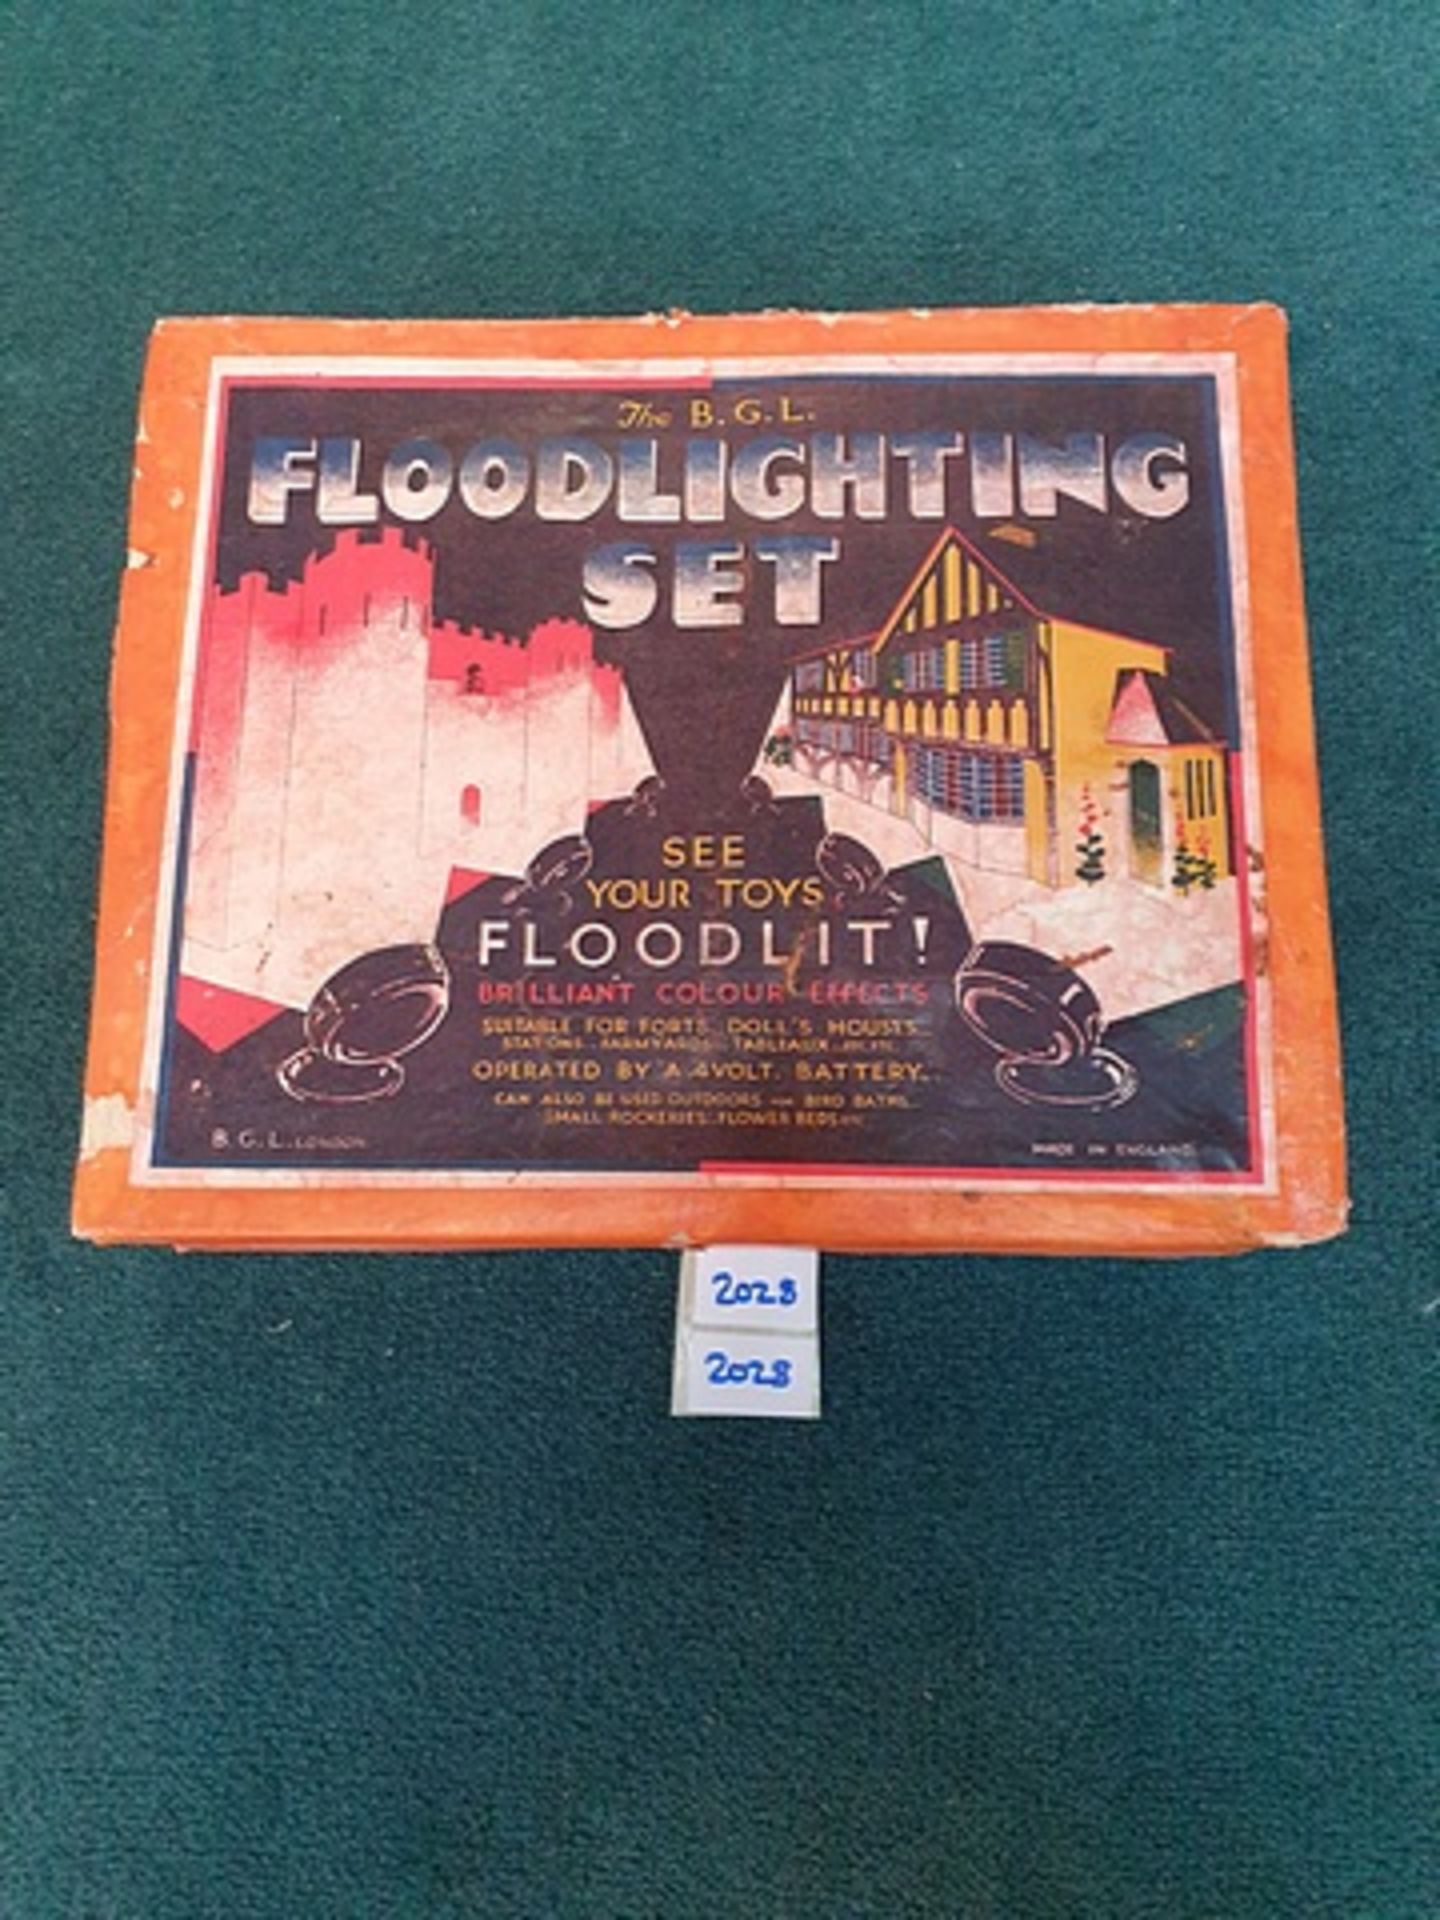 B.G.L. Floodlight Set - English Made, Boxed And Complete To Enable You To "See Your Toys Floodlit